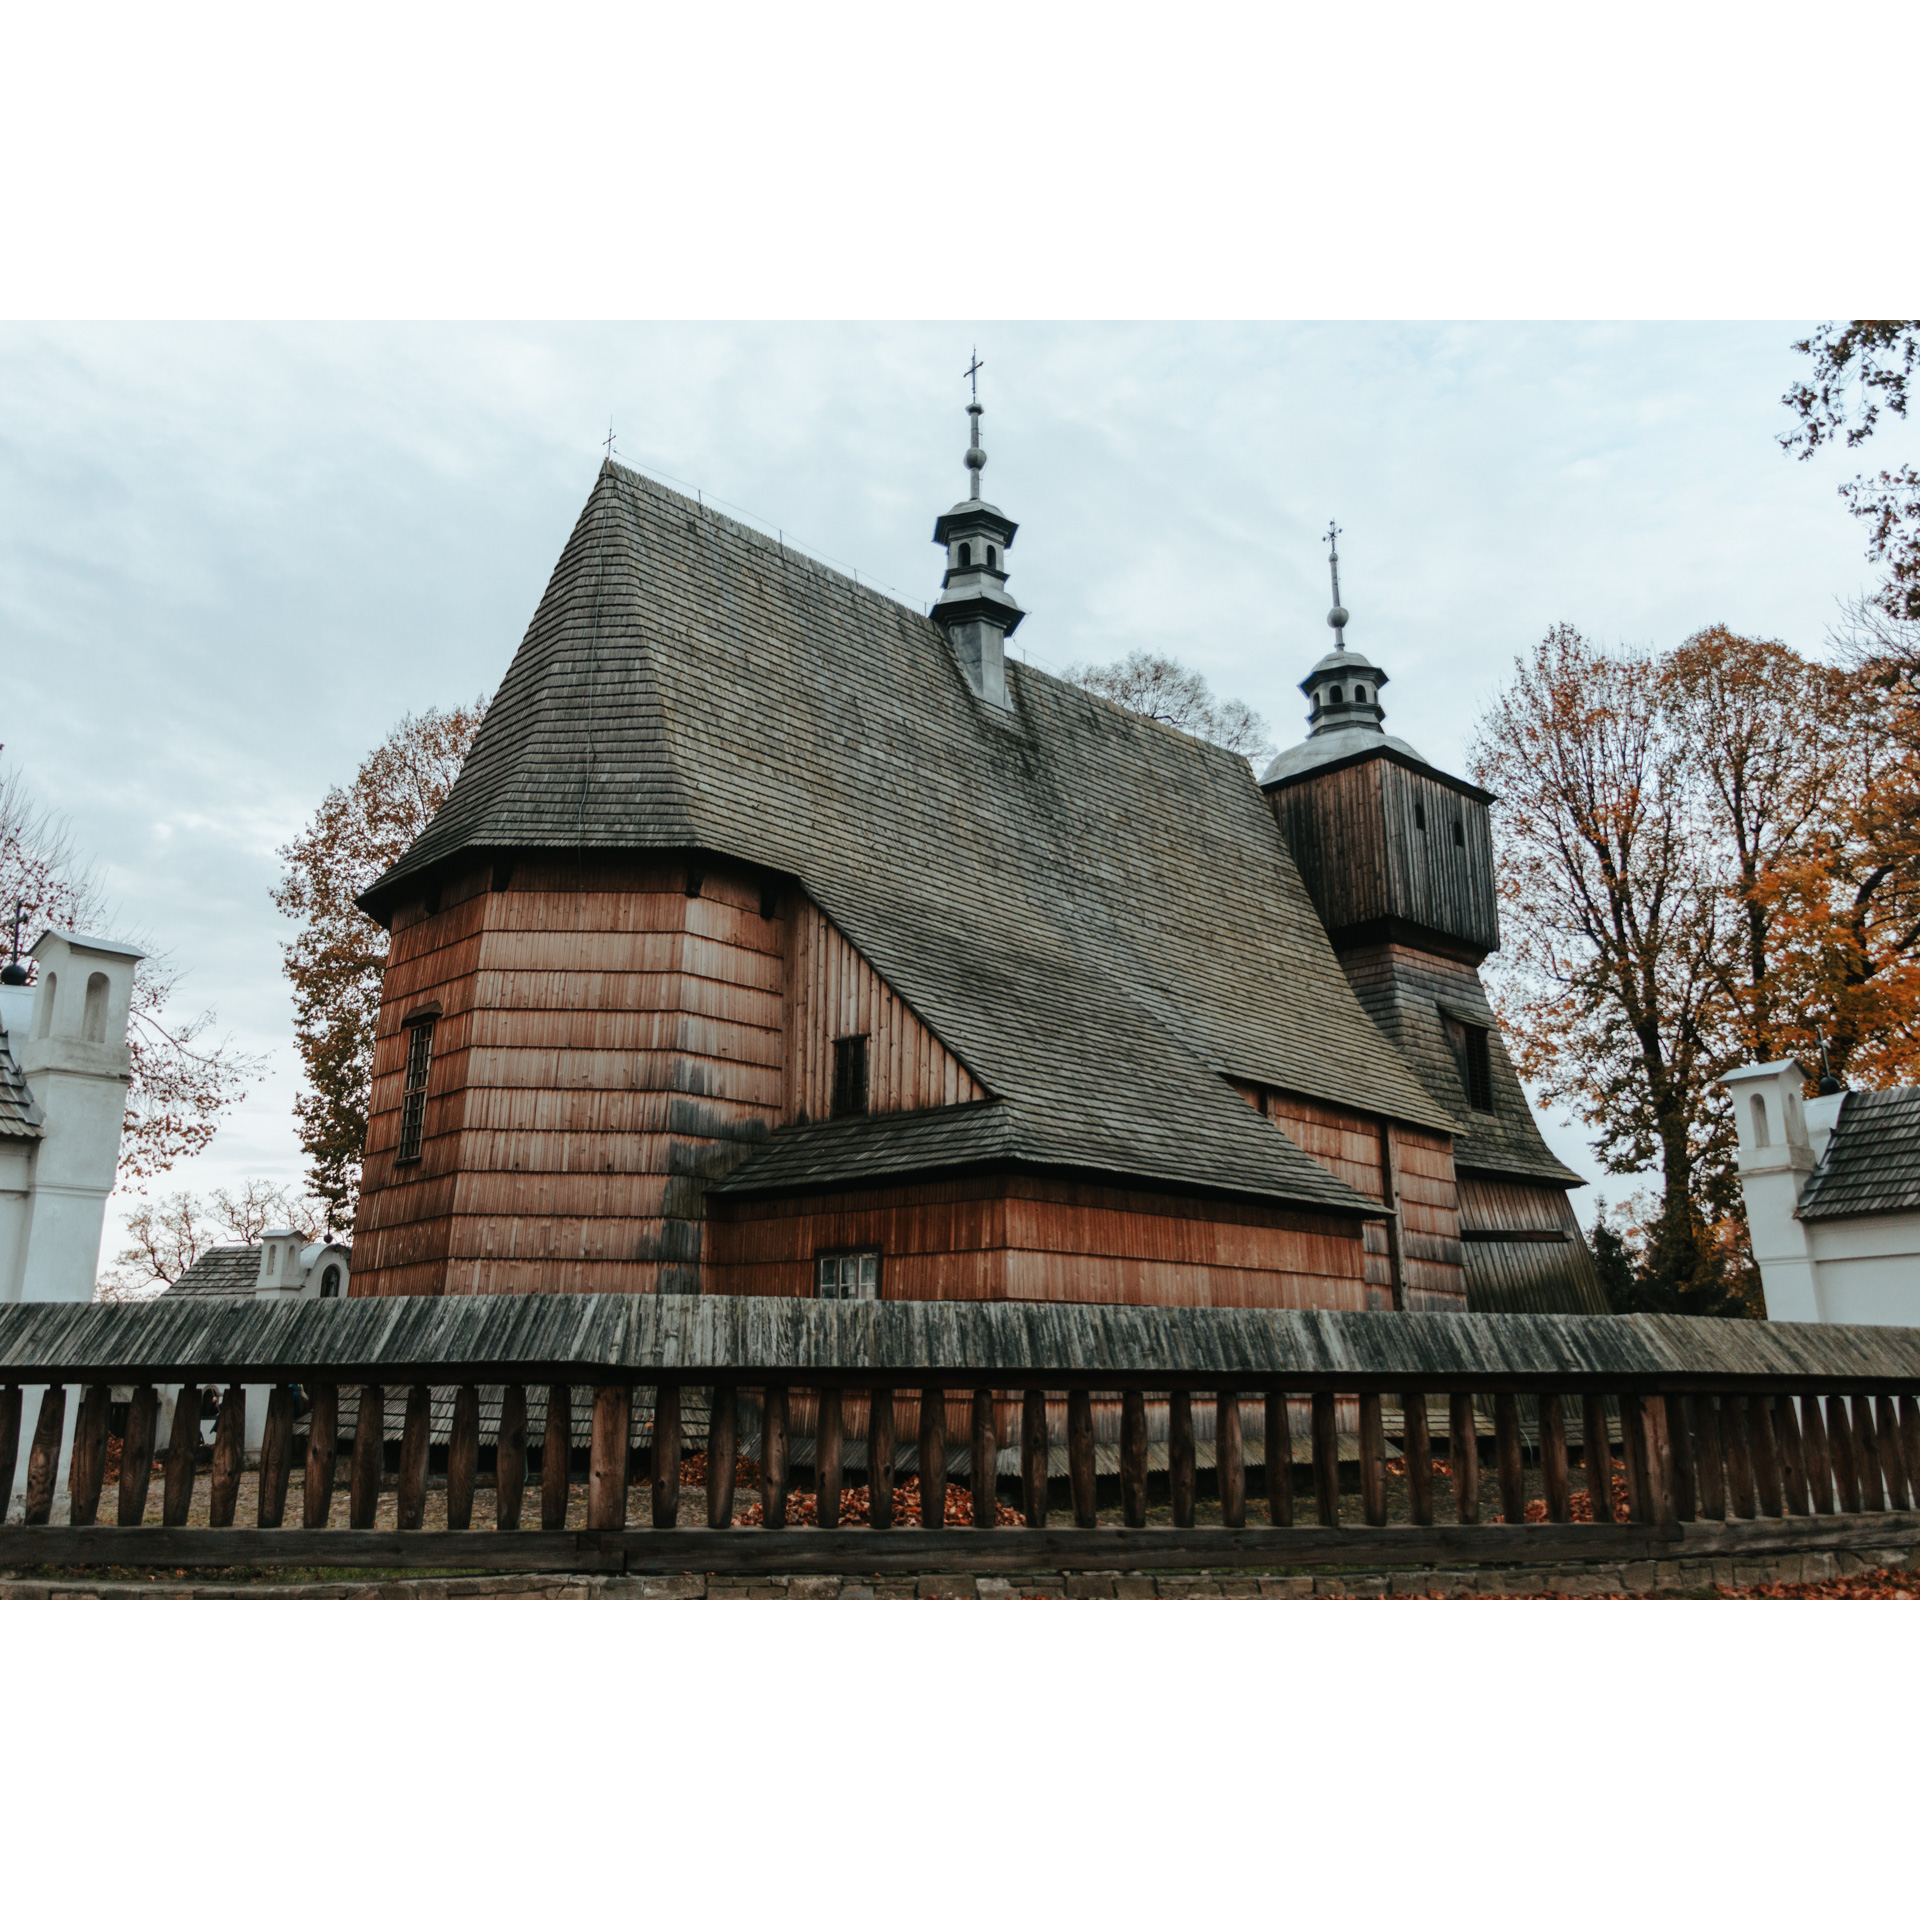 A wooden church with a sloping, dark gray roof and two turrets, a low wooden fence with a roof on the wall in front